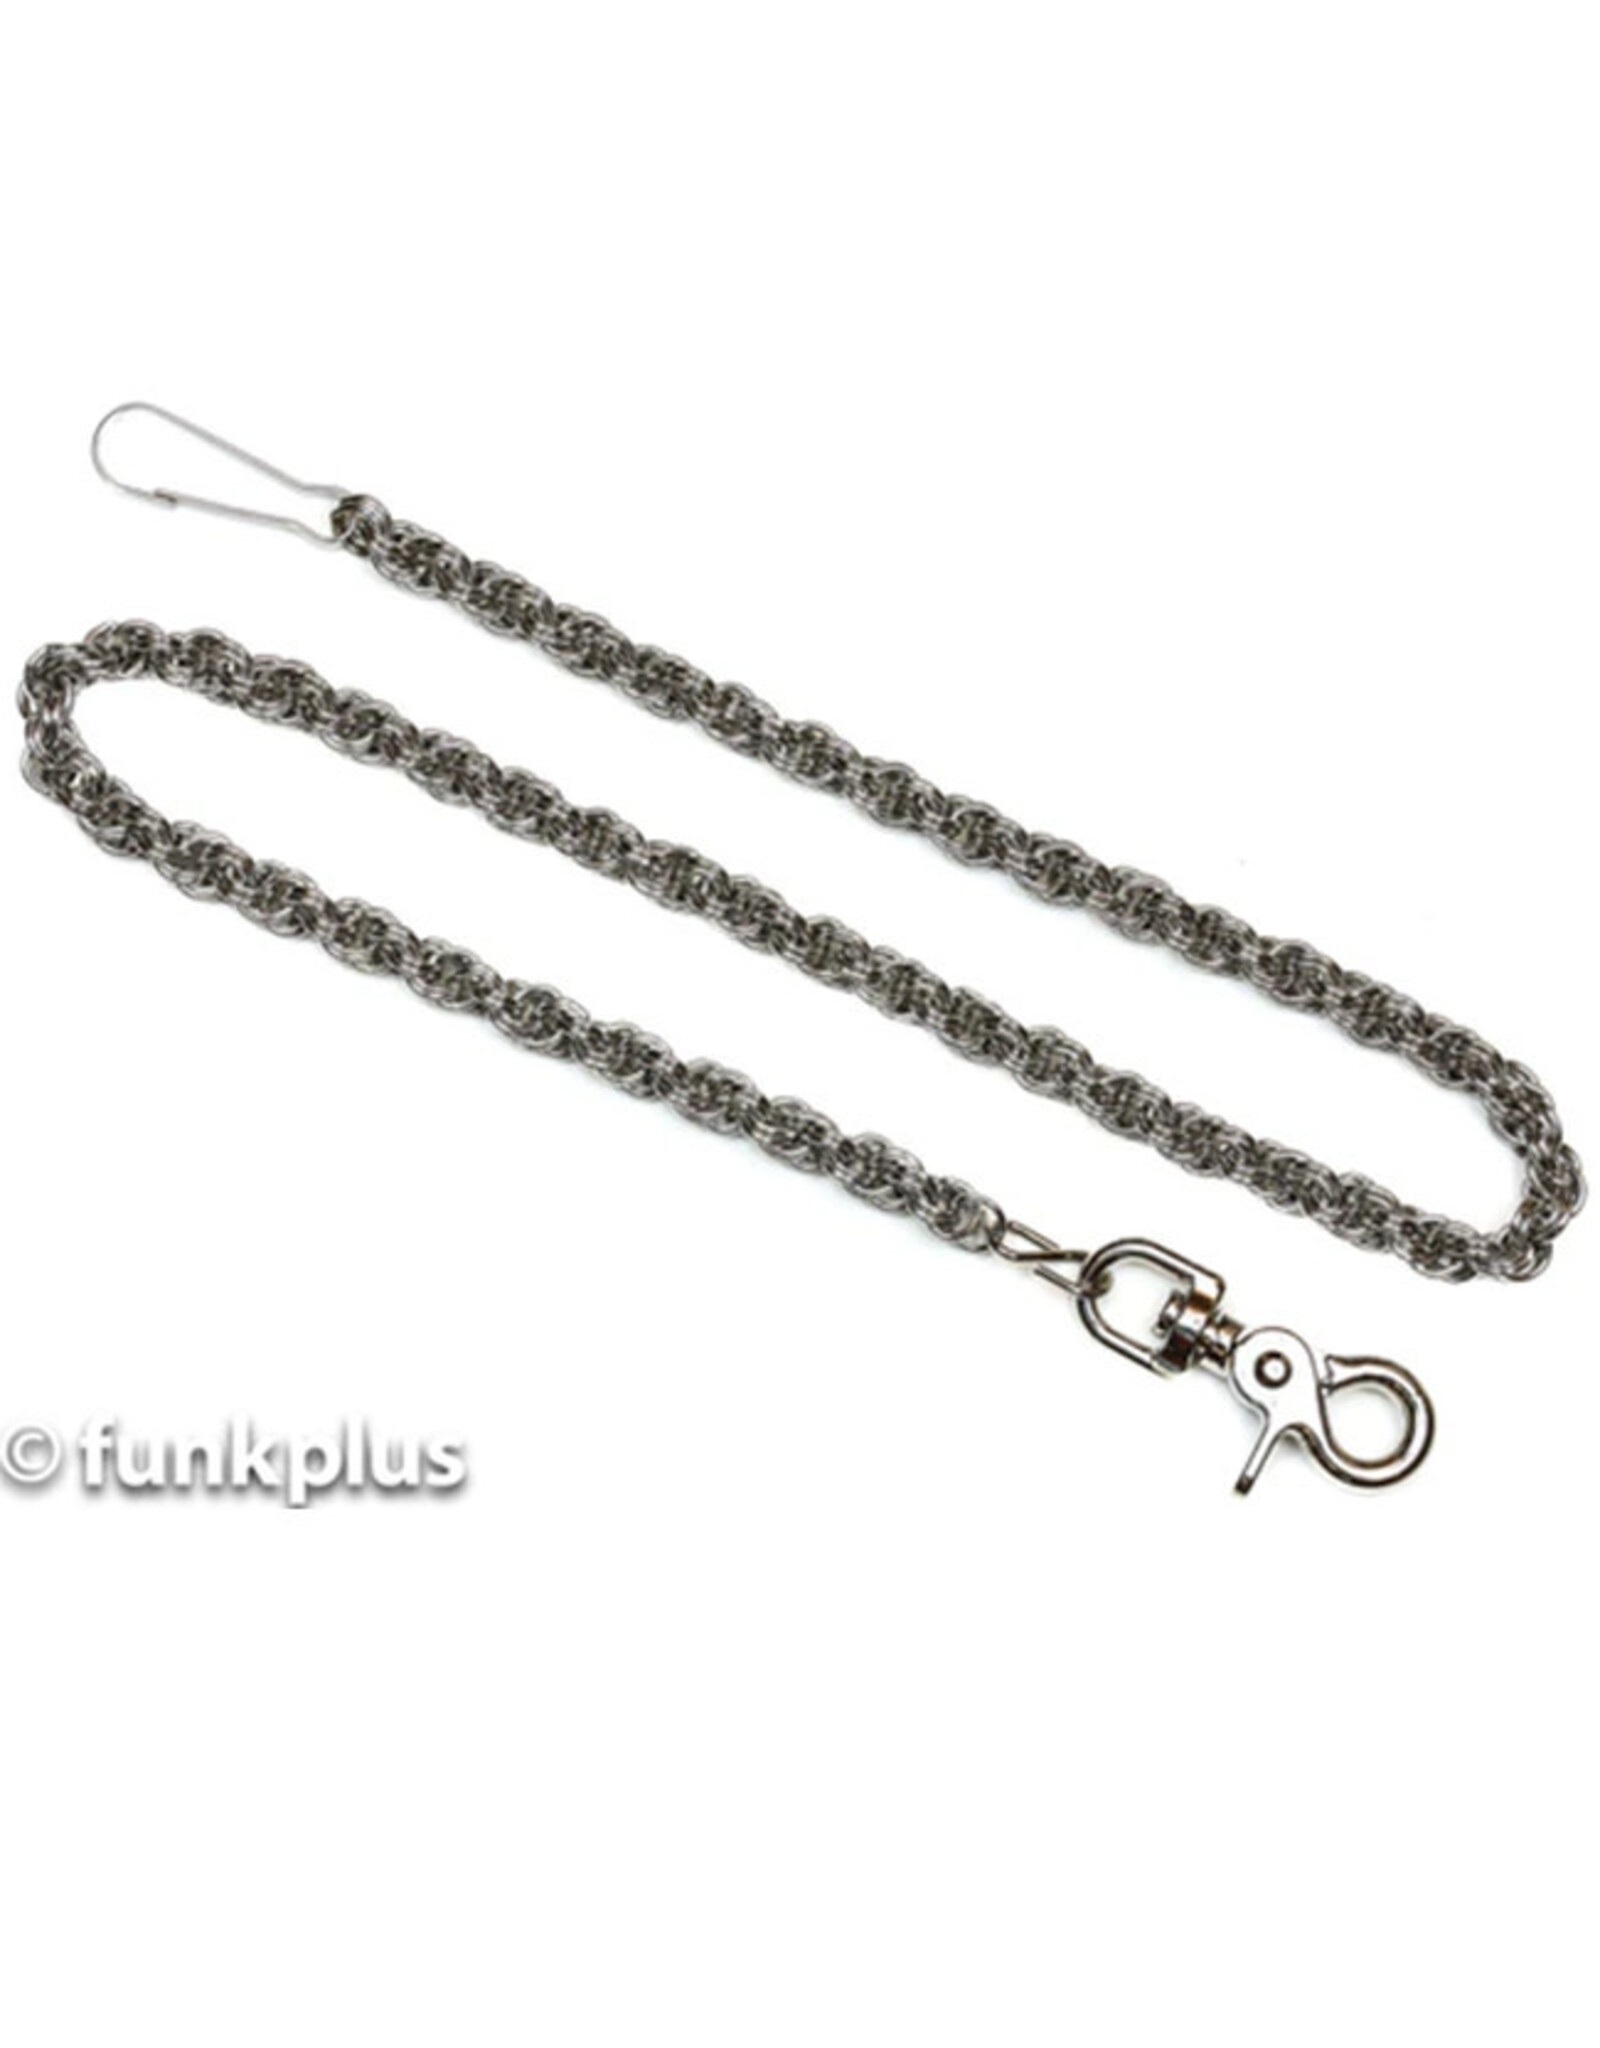 #16 Double Ring Chain with Trigger Clasp - KCDR